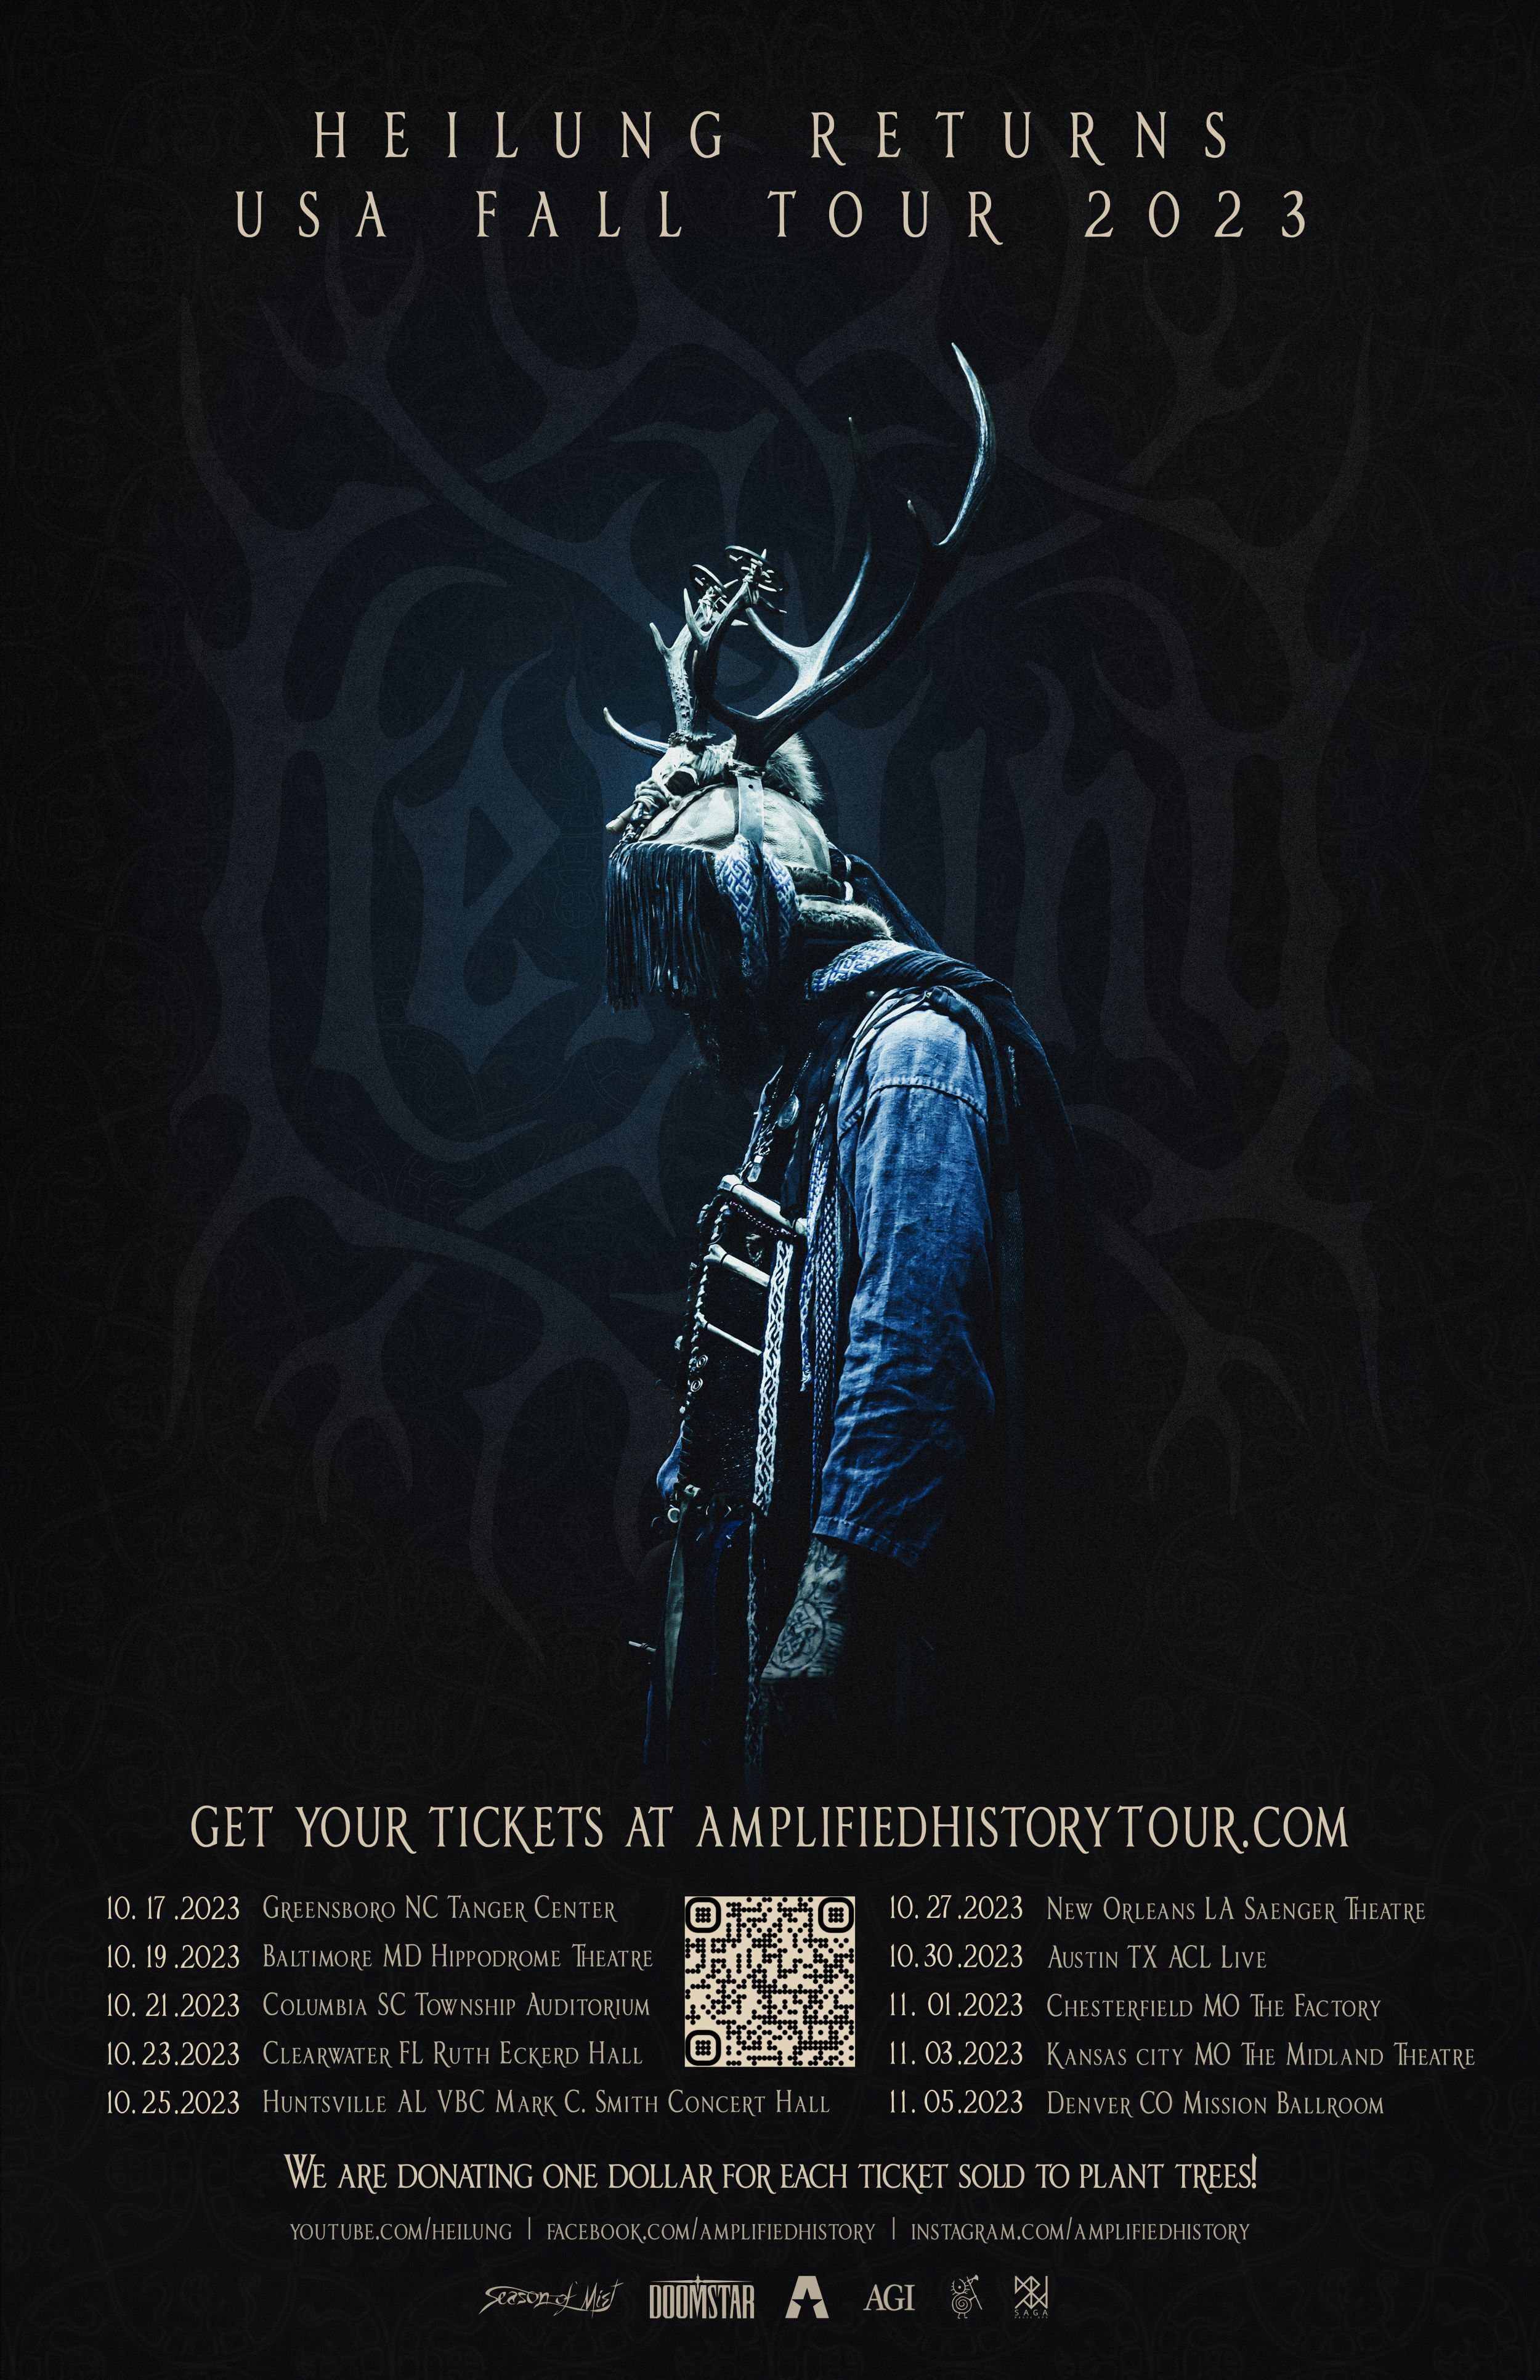 HEILUNG Release New Live Video